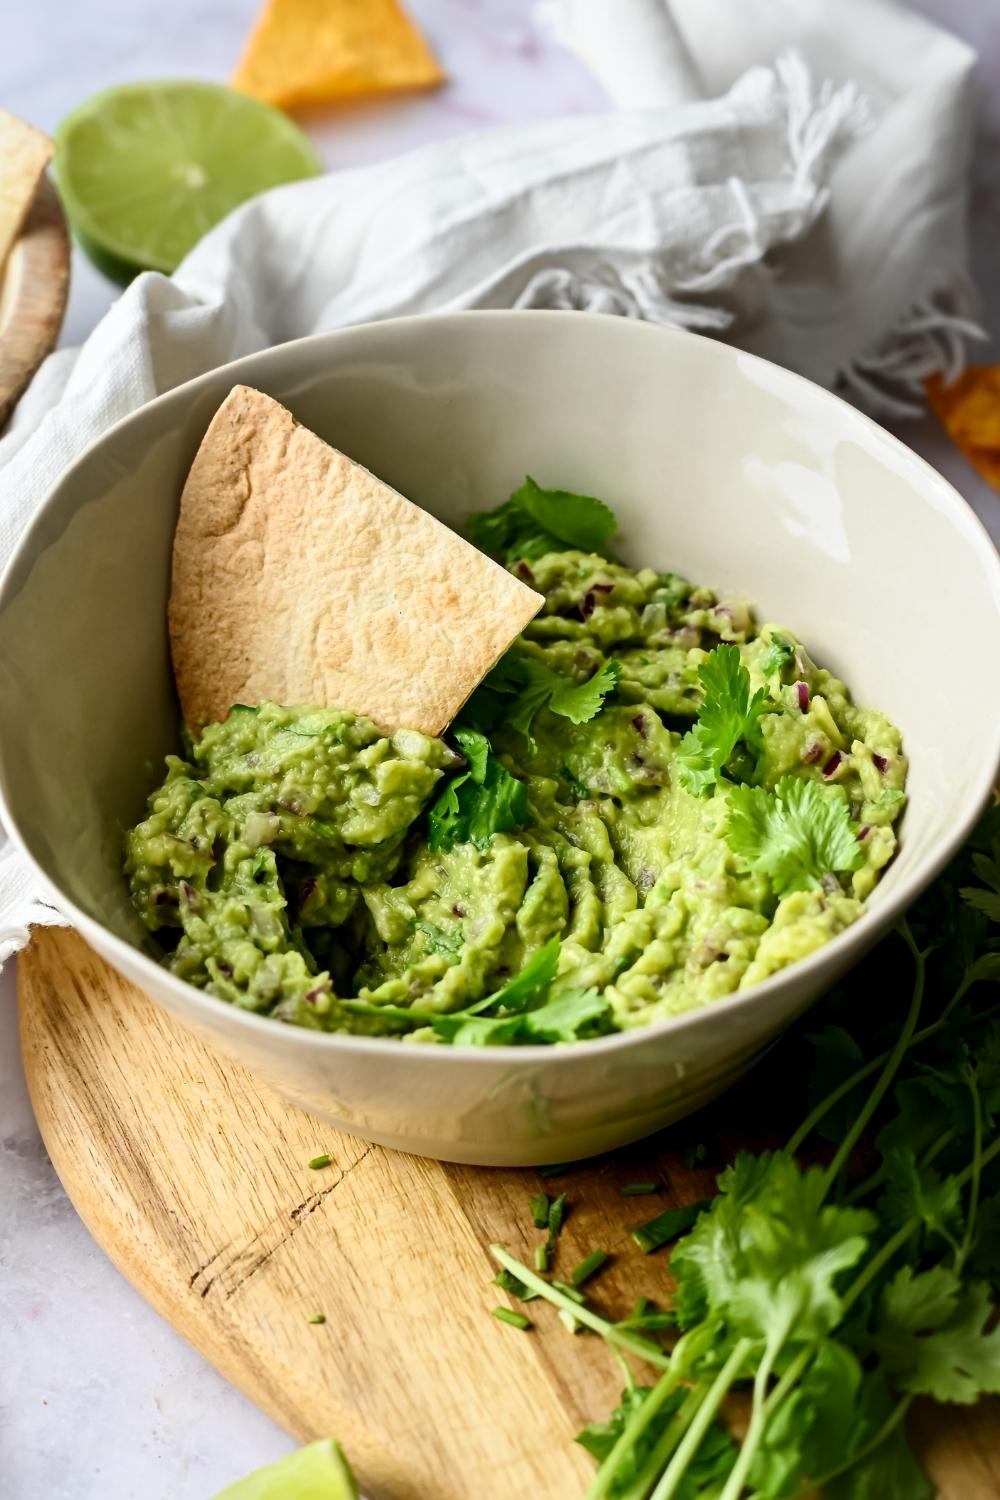 A bowl of homemade chipotle guacamole garnished with parsley served on a wooden cutting board. A tortilla chip is dipped in the bowl.